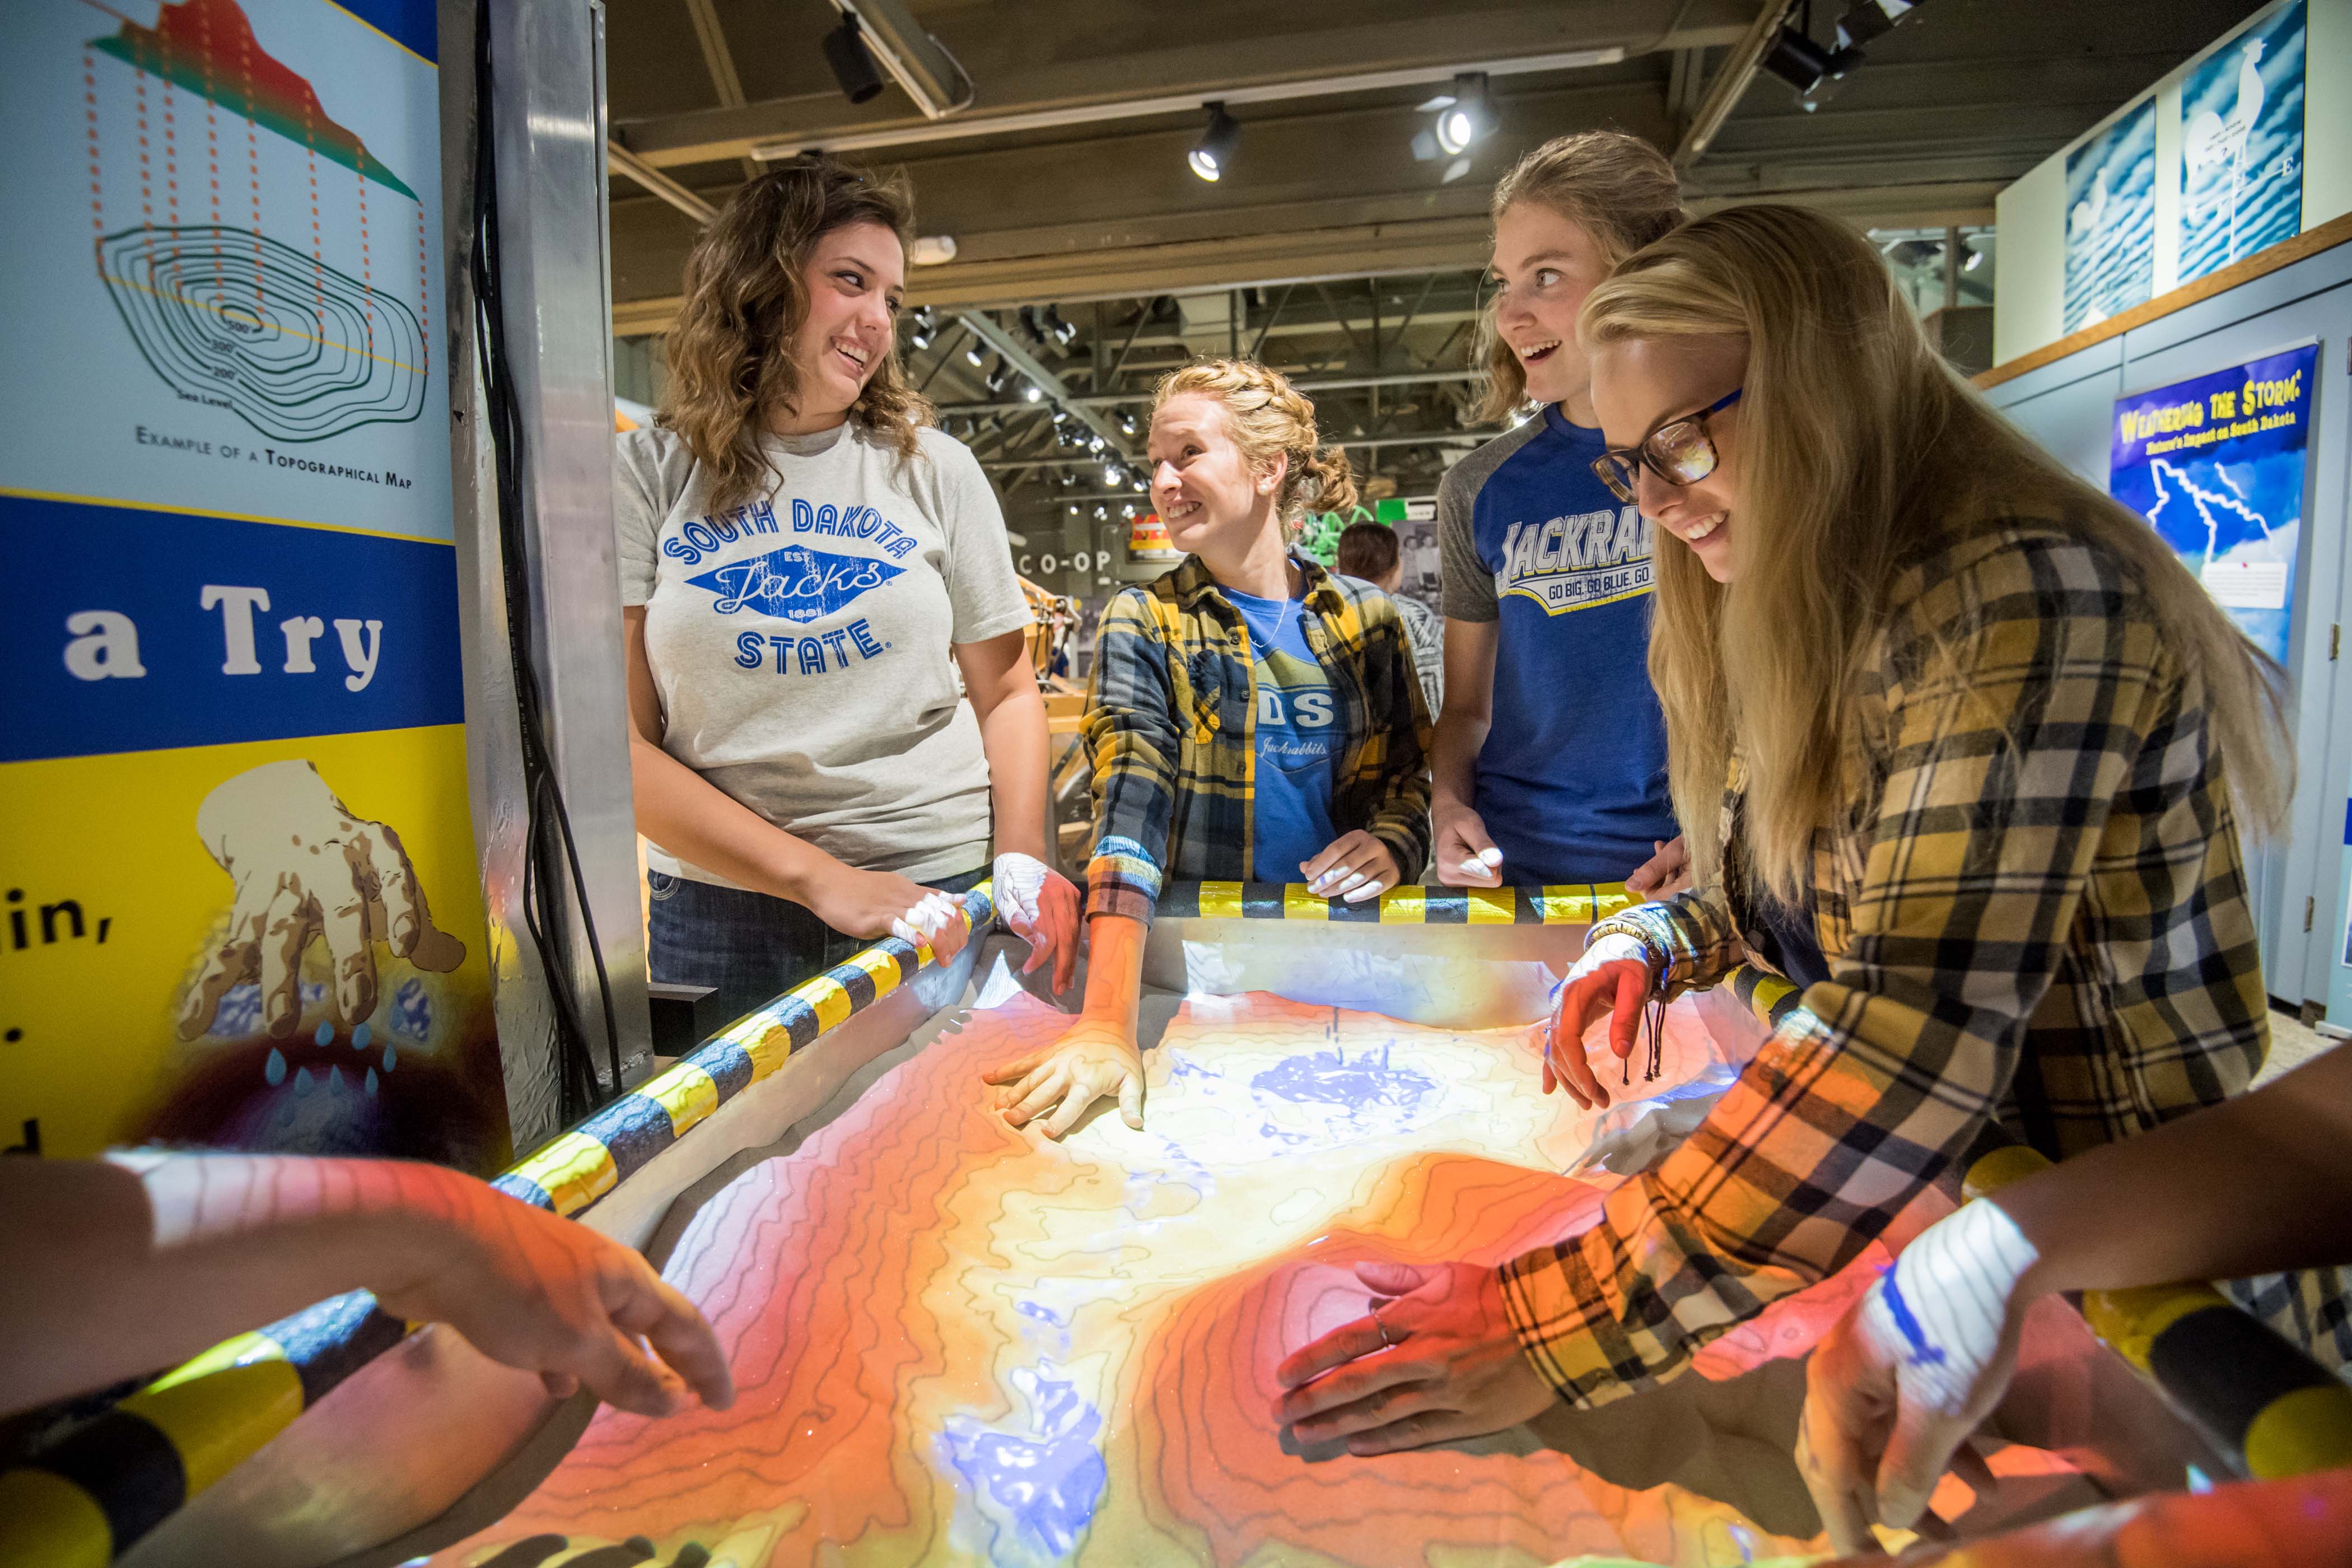 Group of girls interacting with an interactive exhibit